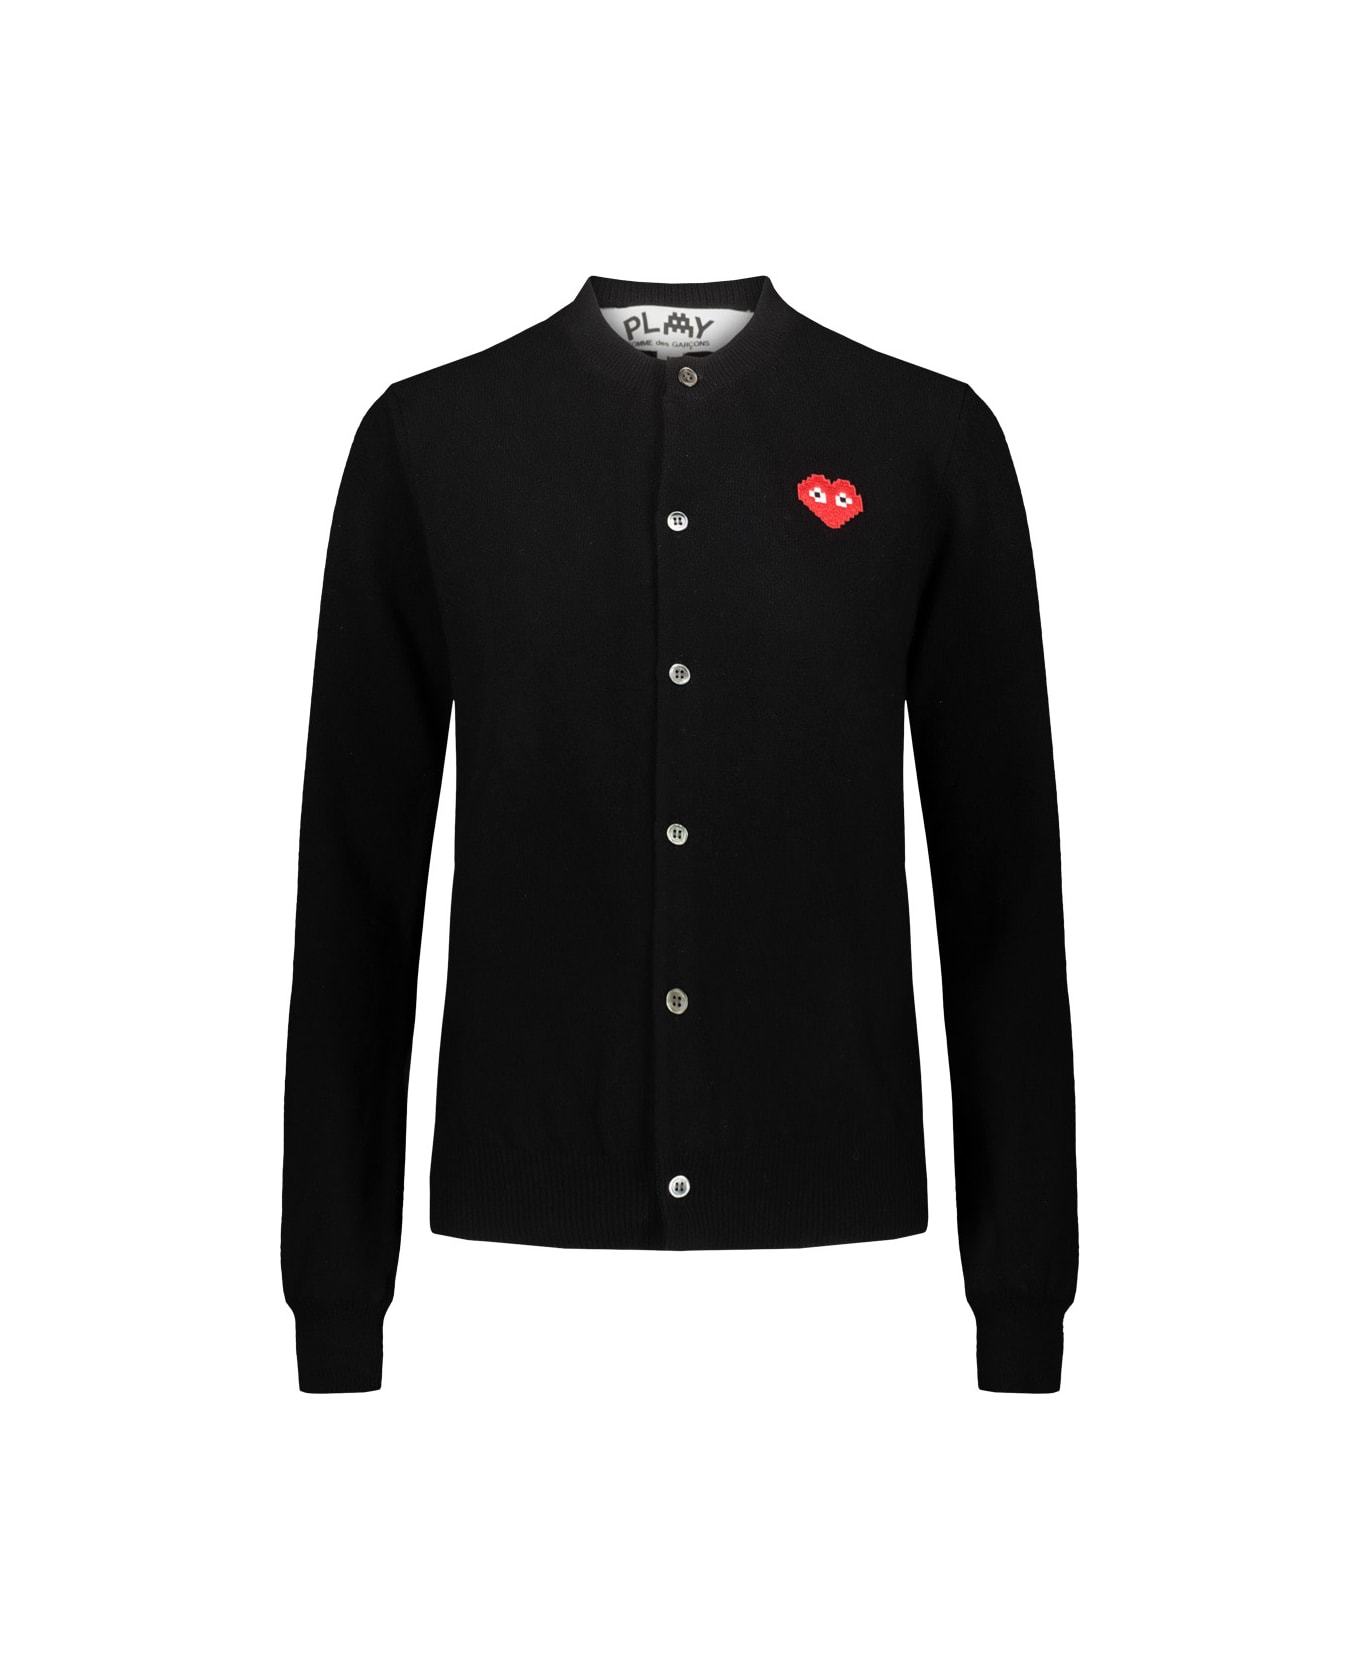 Comme des Garçons Play Black Cardigan With Red Pixelated Heart - Blk